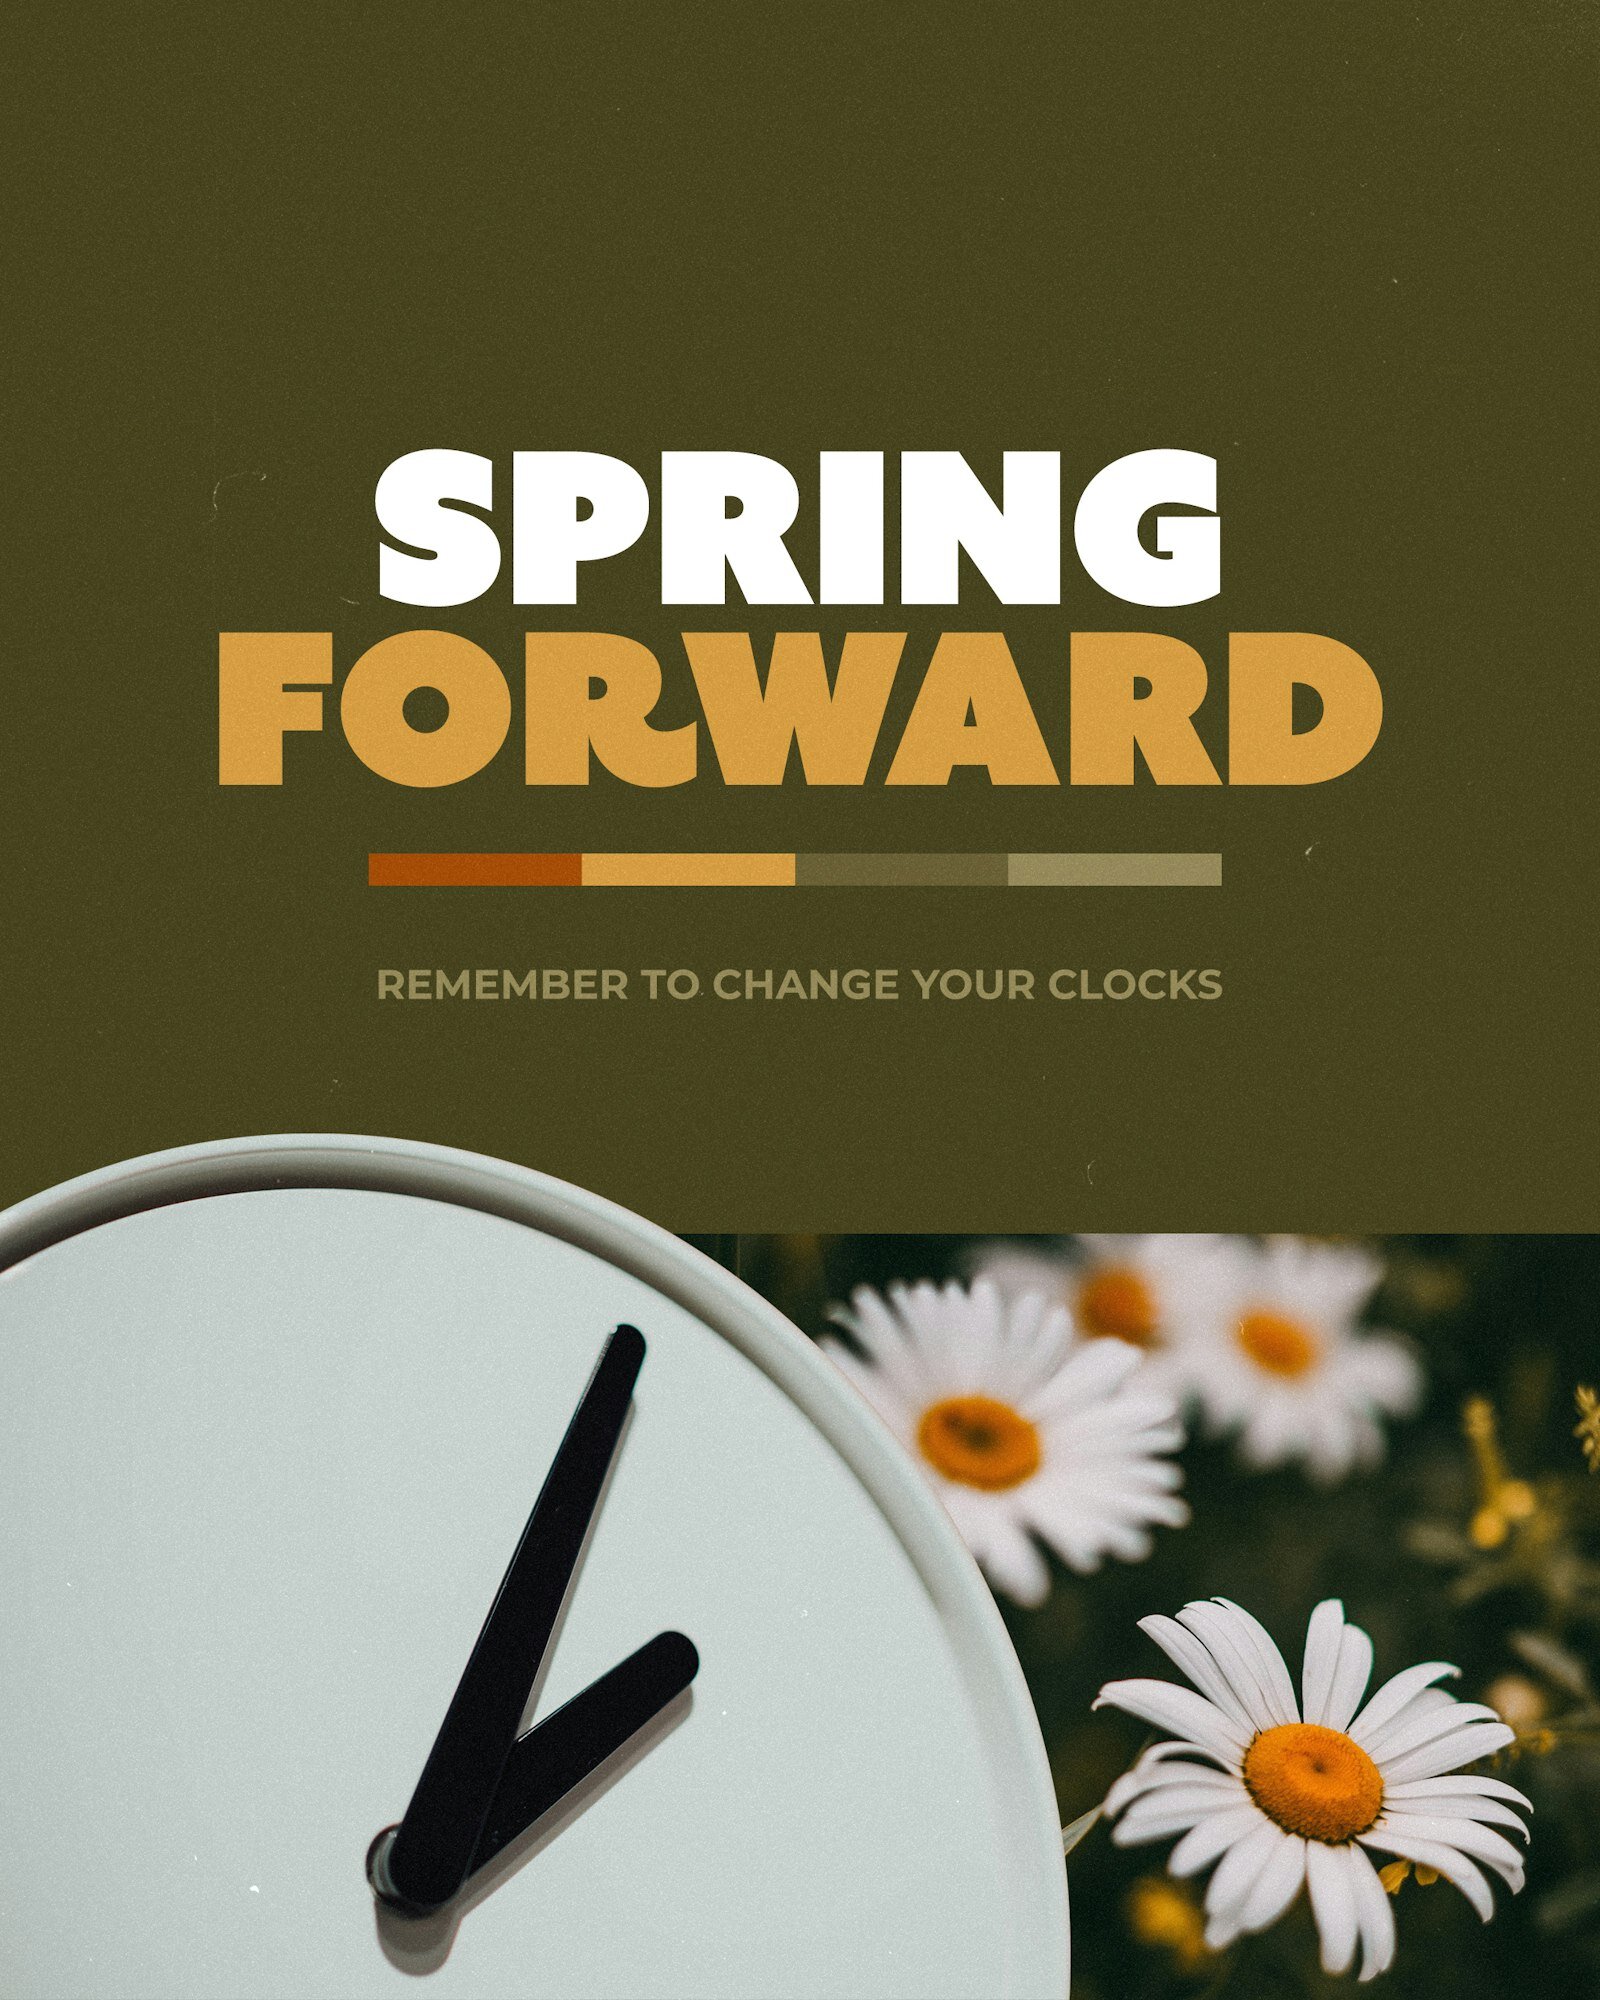 Friendly reminder: Don't forget....this Sunday we spring forward one hour!